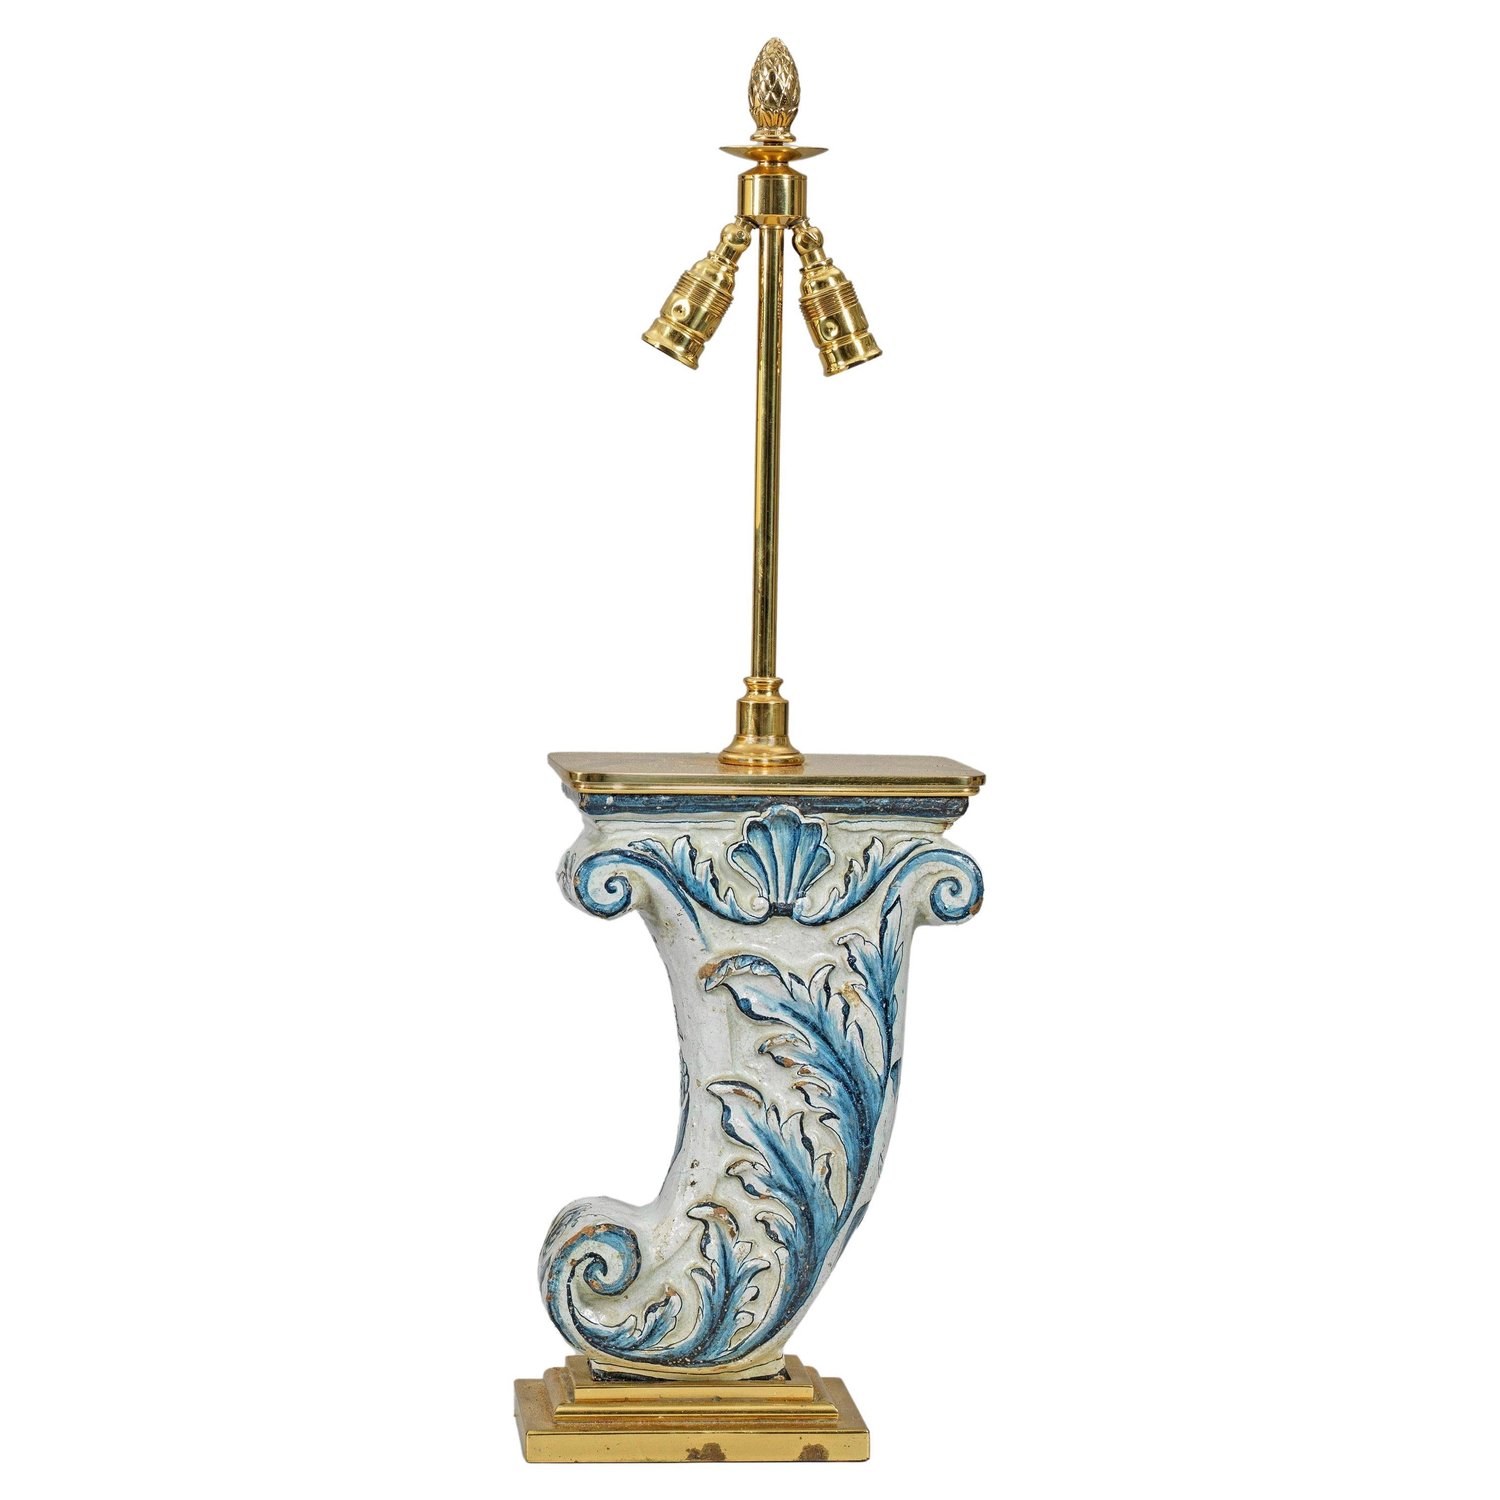 Image of Gilt brass table lamp with Antique Blue and Cream German Faience Architectural Acanthi Fragment